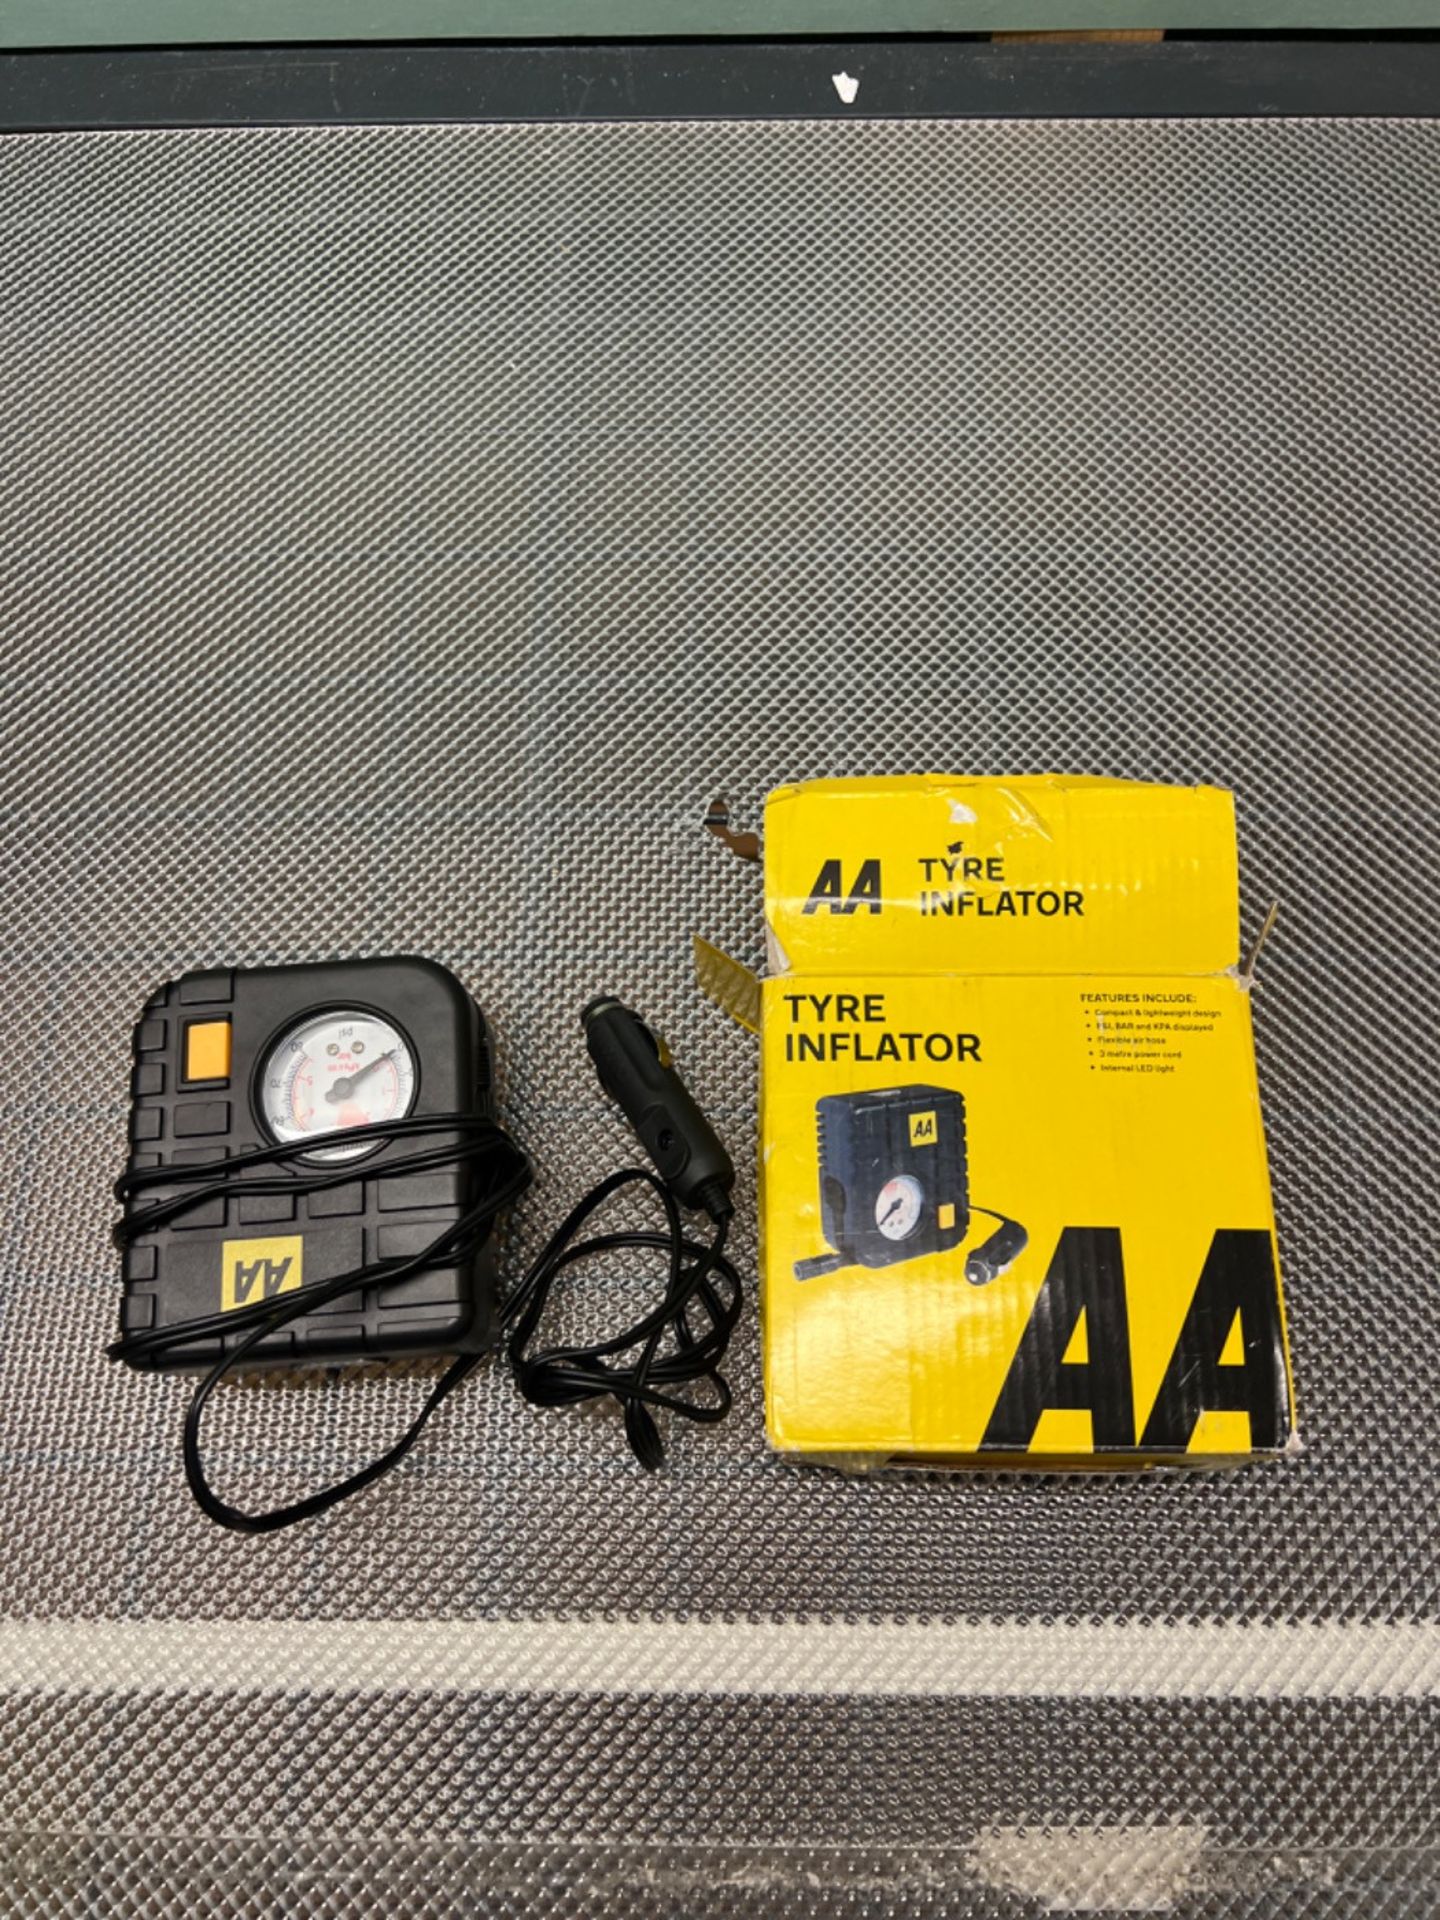 AA Car Essentials 12V Compact Tyre Inflator AA5007 â€“ For Cars Vans Motorbikes Vehicles Infla - Image 3 of 3